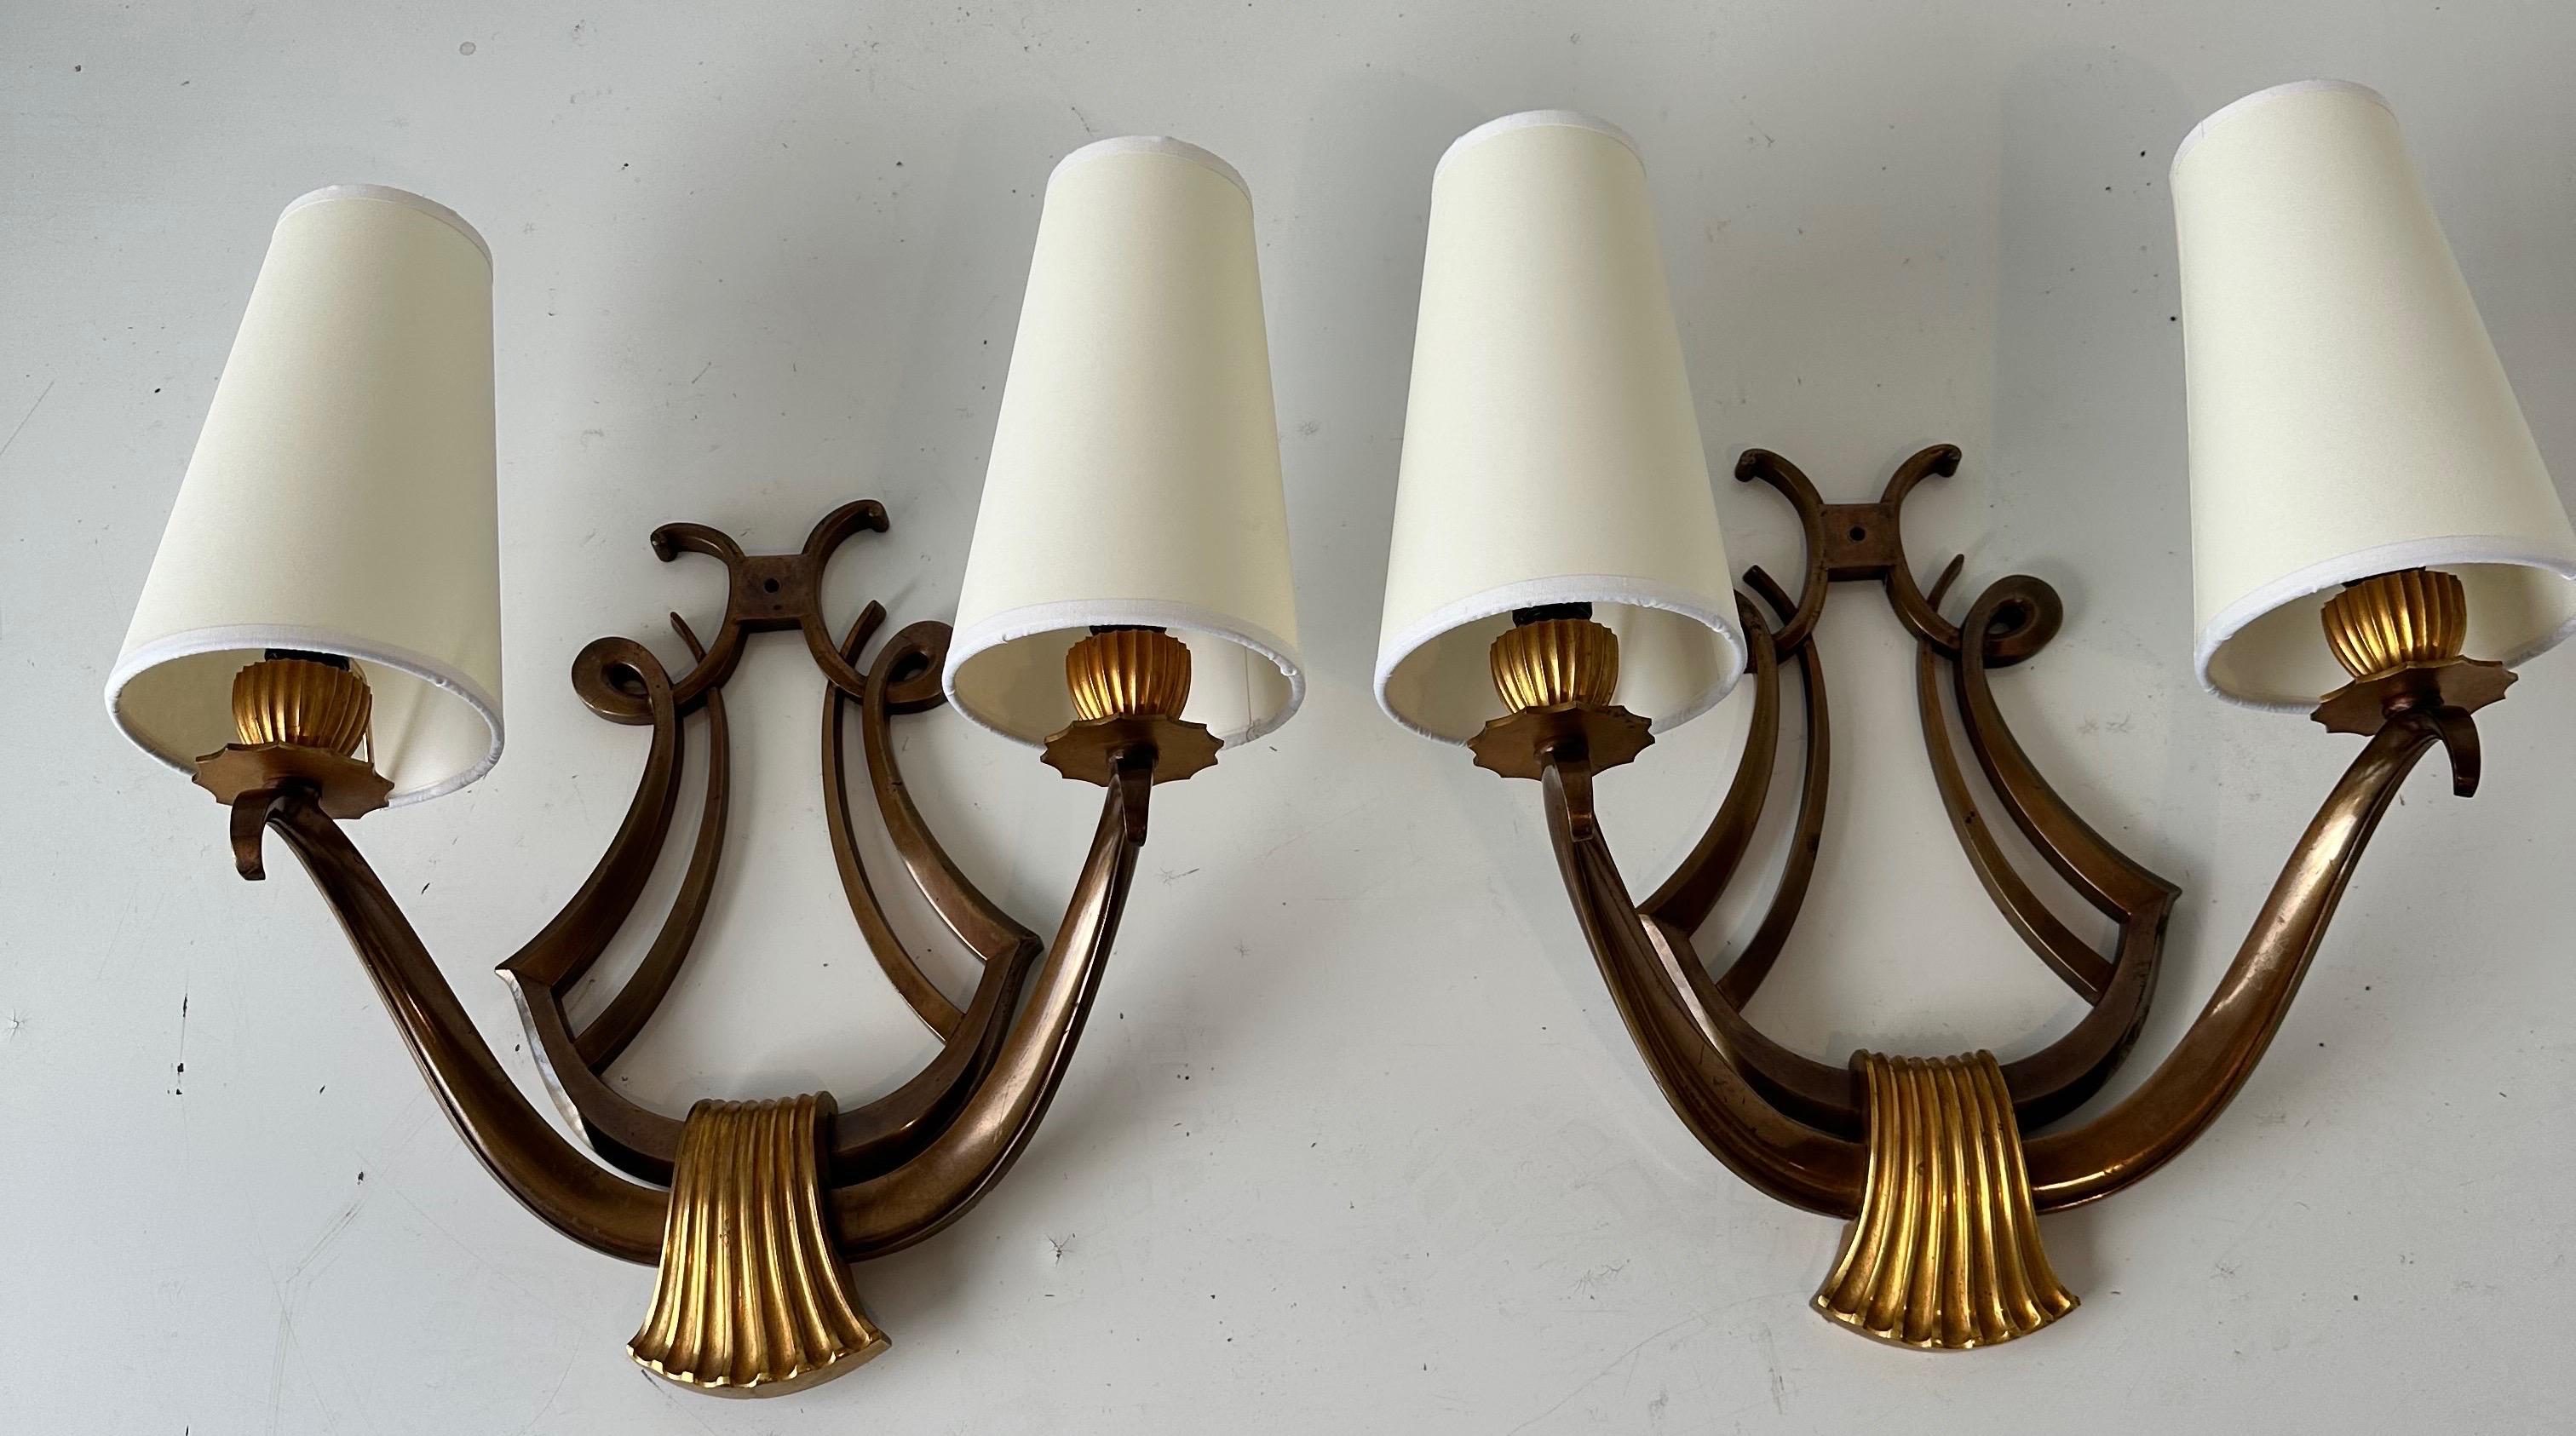 Exceptional Quality Pair of Signed Genet et Michon “Lyre” Bronze Sconces .
Signed and Numbered on the Back .
Two Patina Bronze .
US rewired.